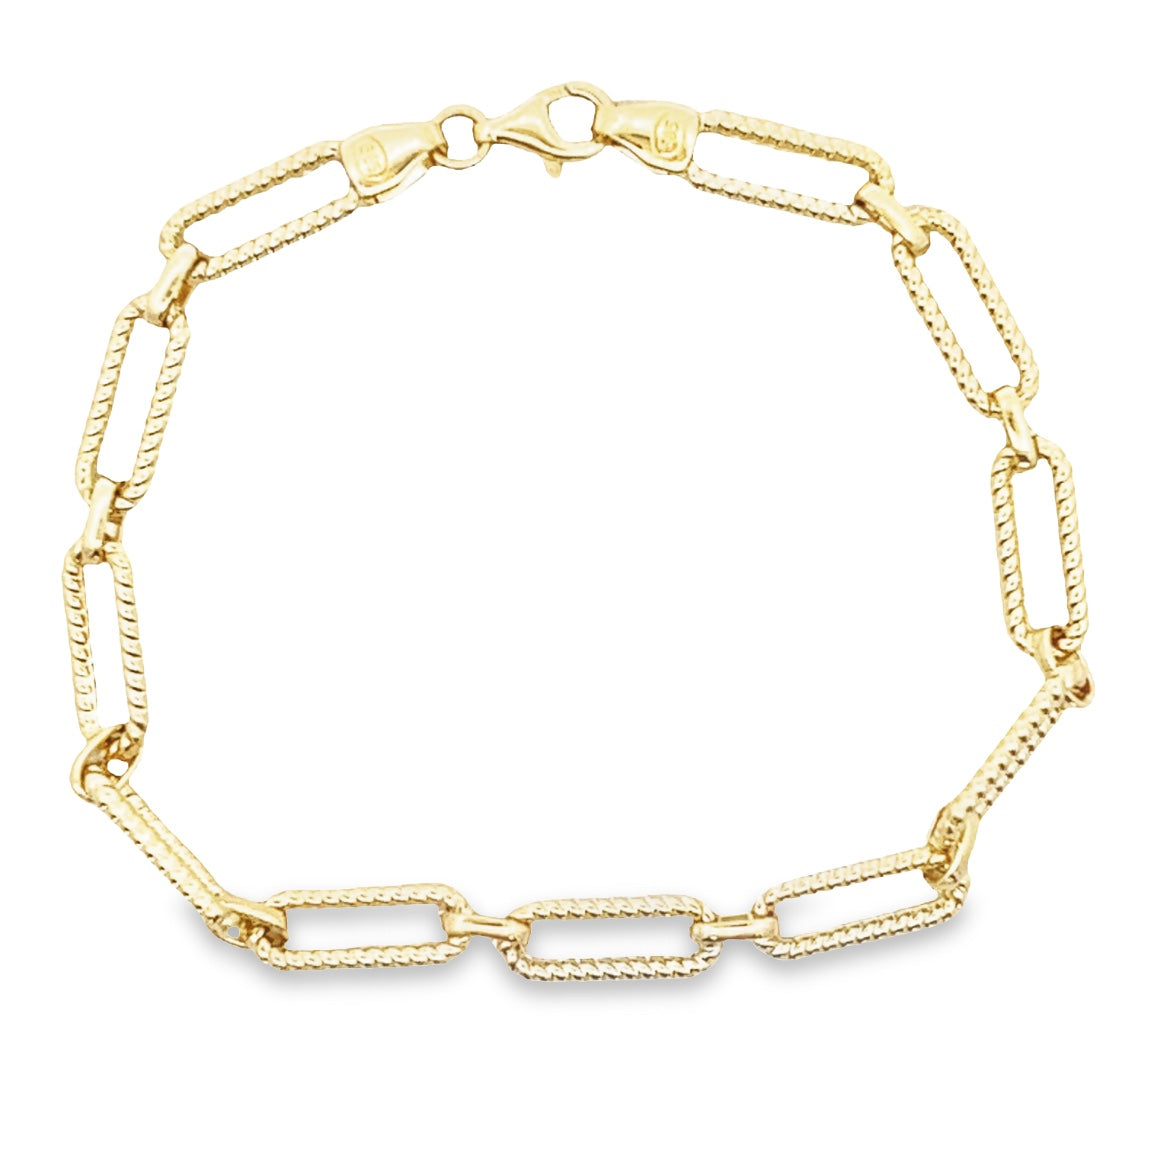 14K GOLD LINK BRECELET WITH MESH TEXTURE